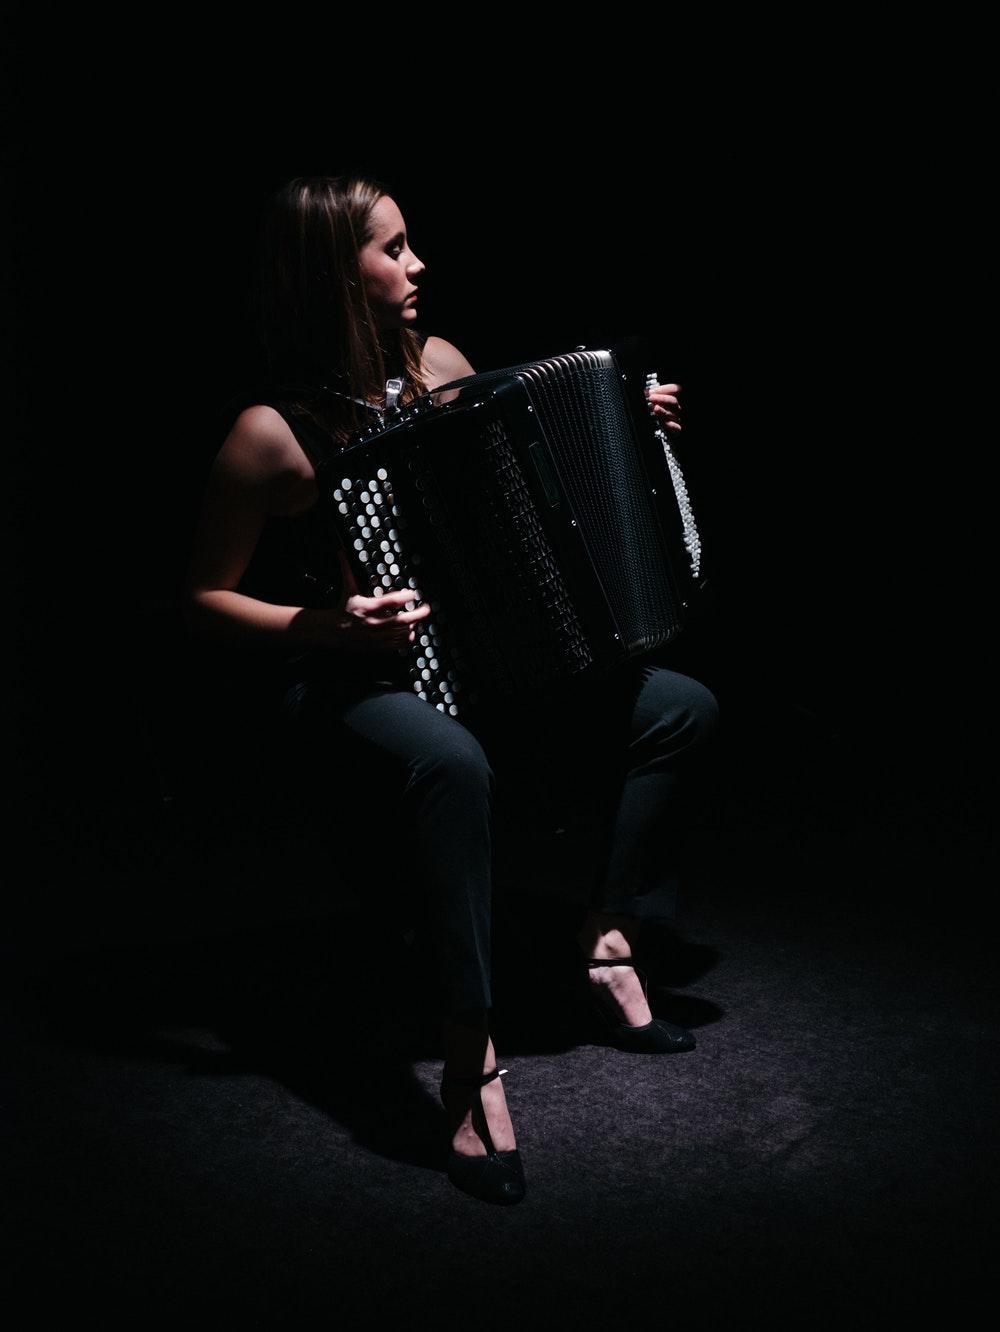 Accordion Player Picture. Download Free Image